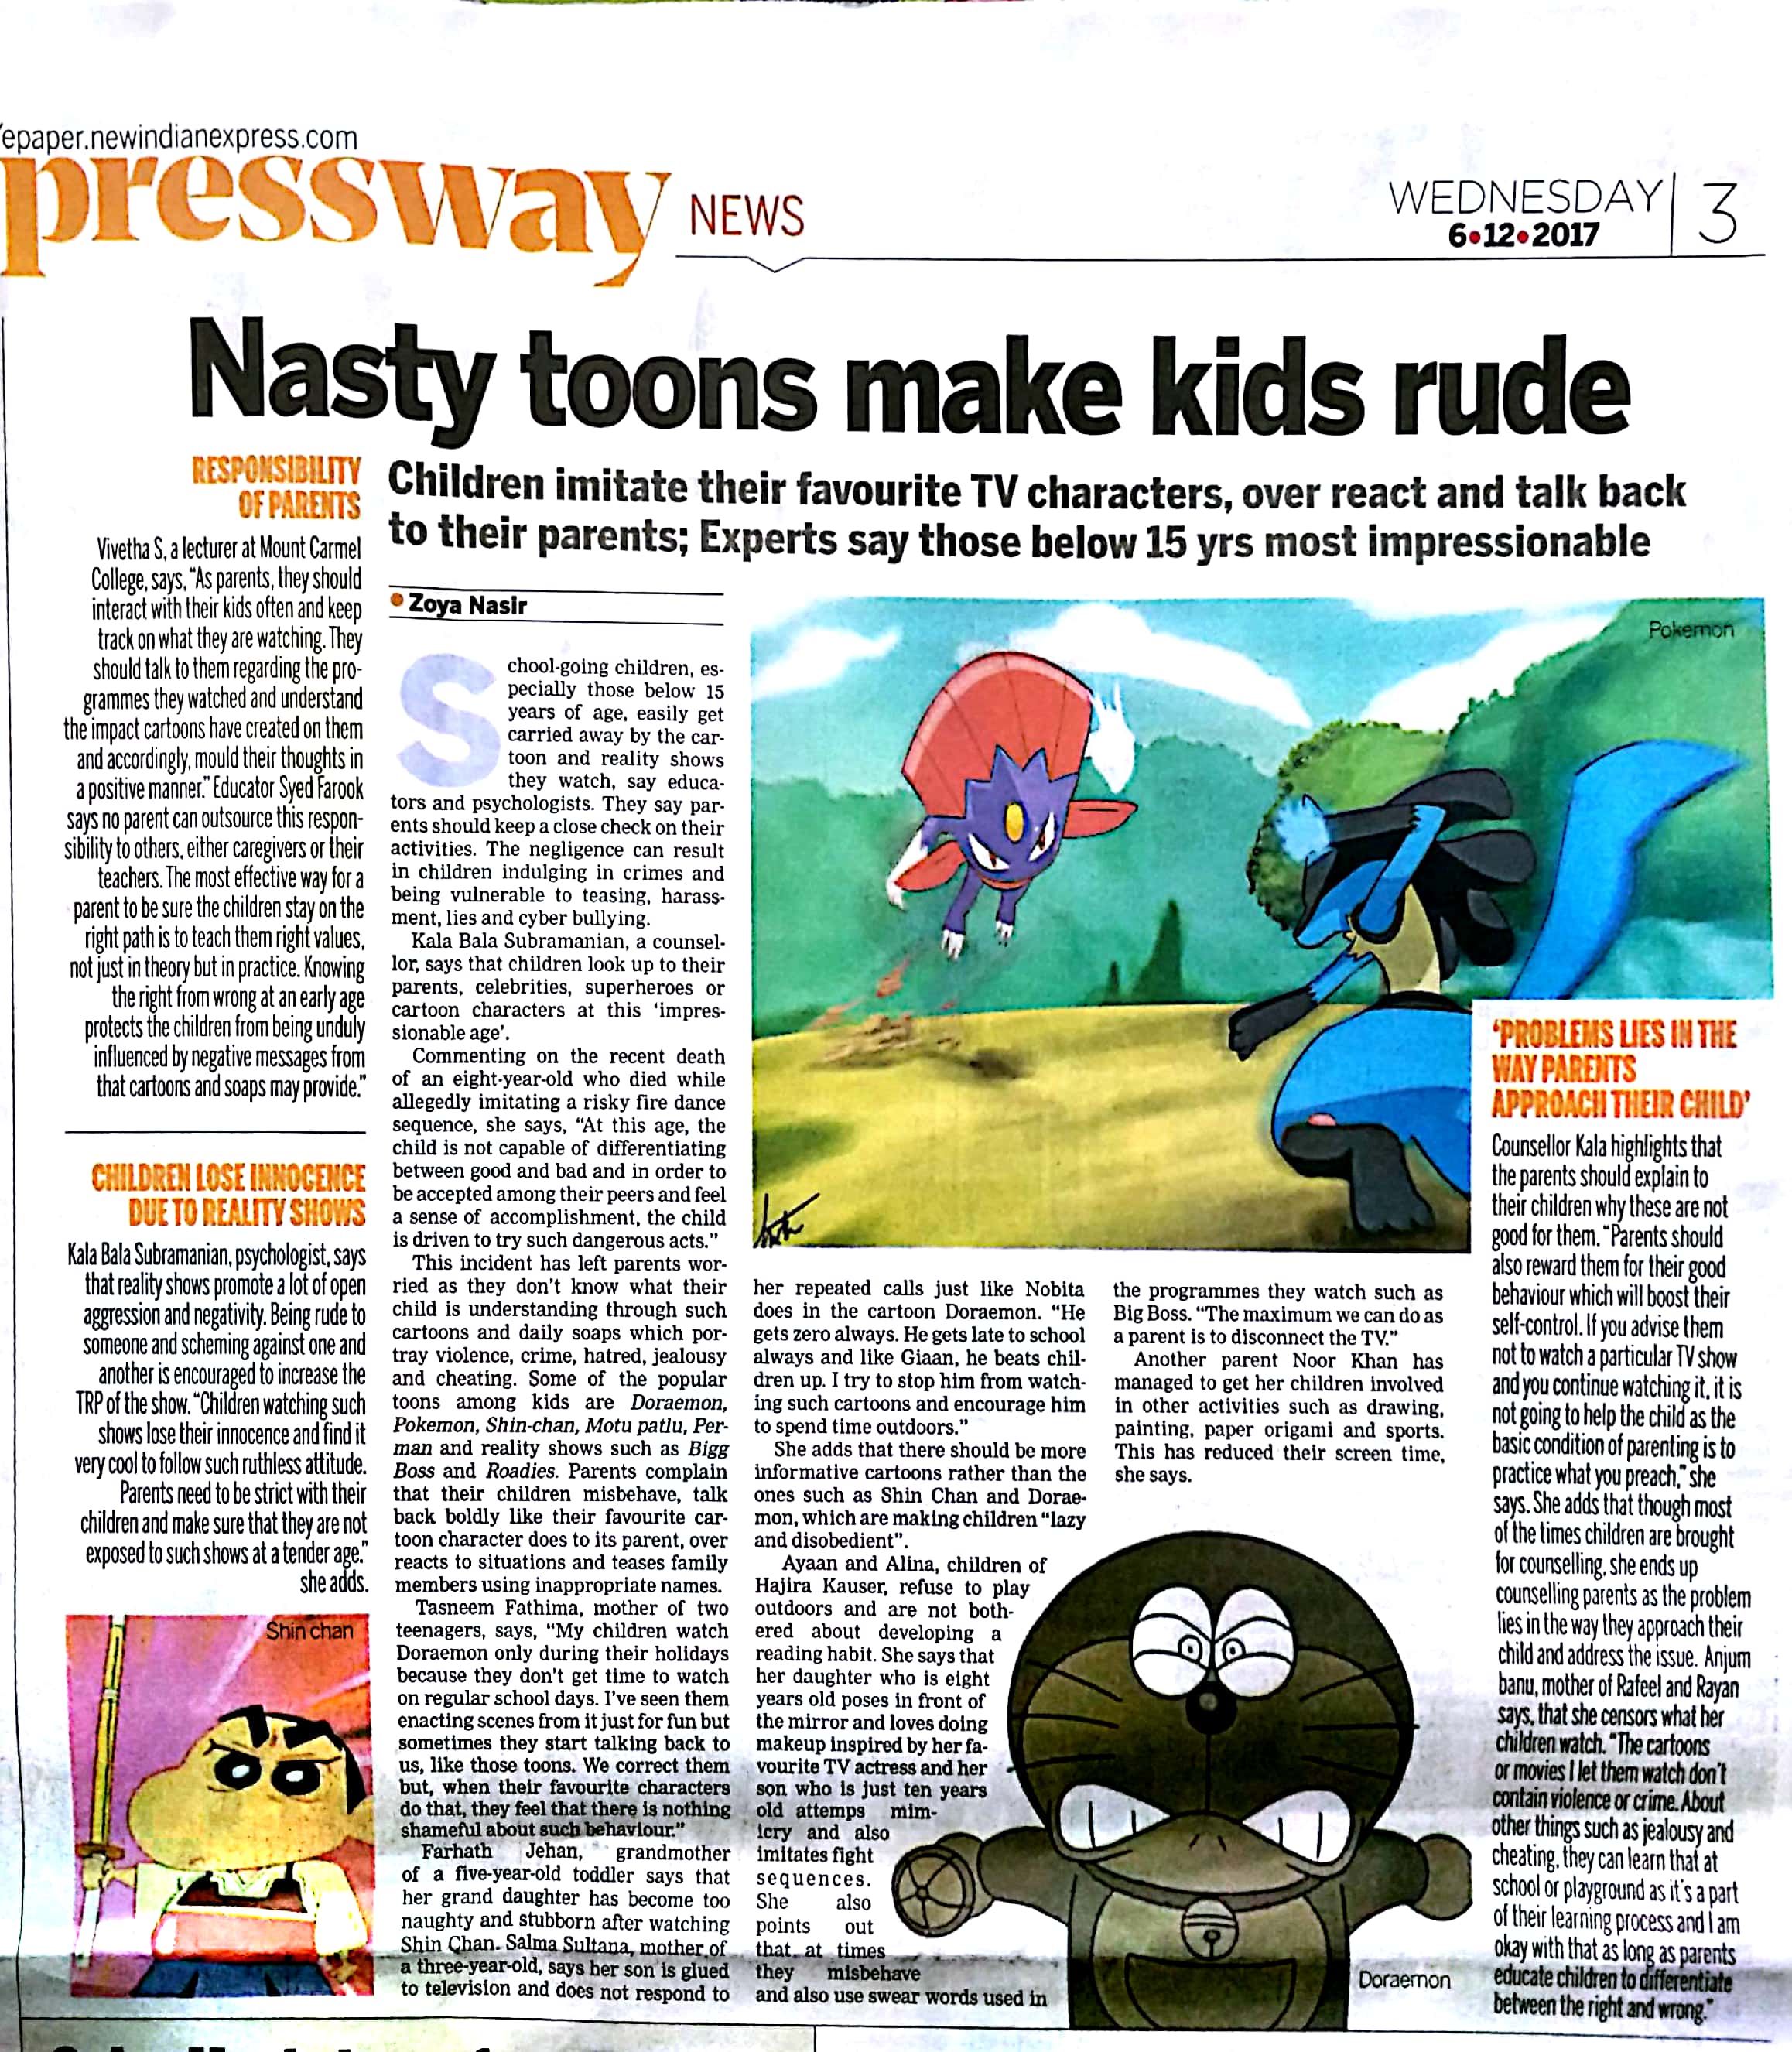 Rude and Nasty TV Show characters impact Children - Inner Dawn Counsellor -Kala Balasubramanians views featured in Indian Express